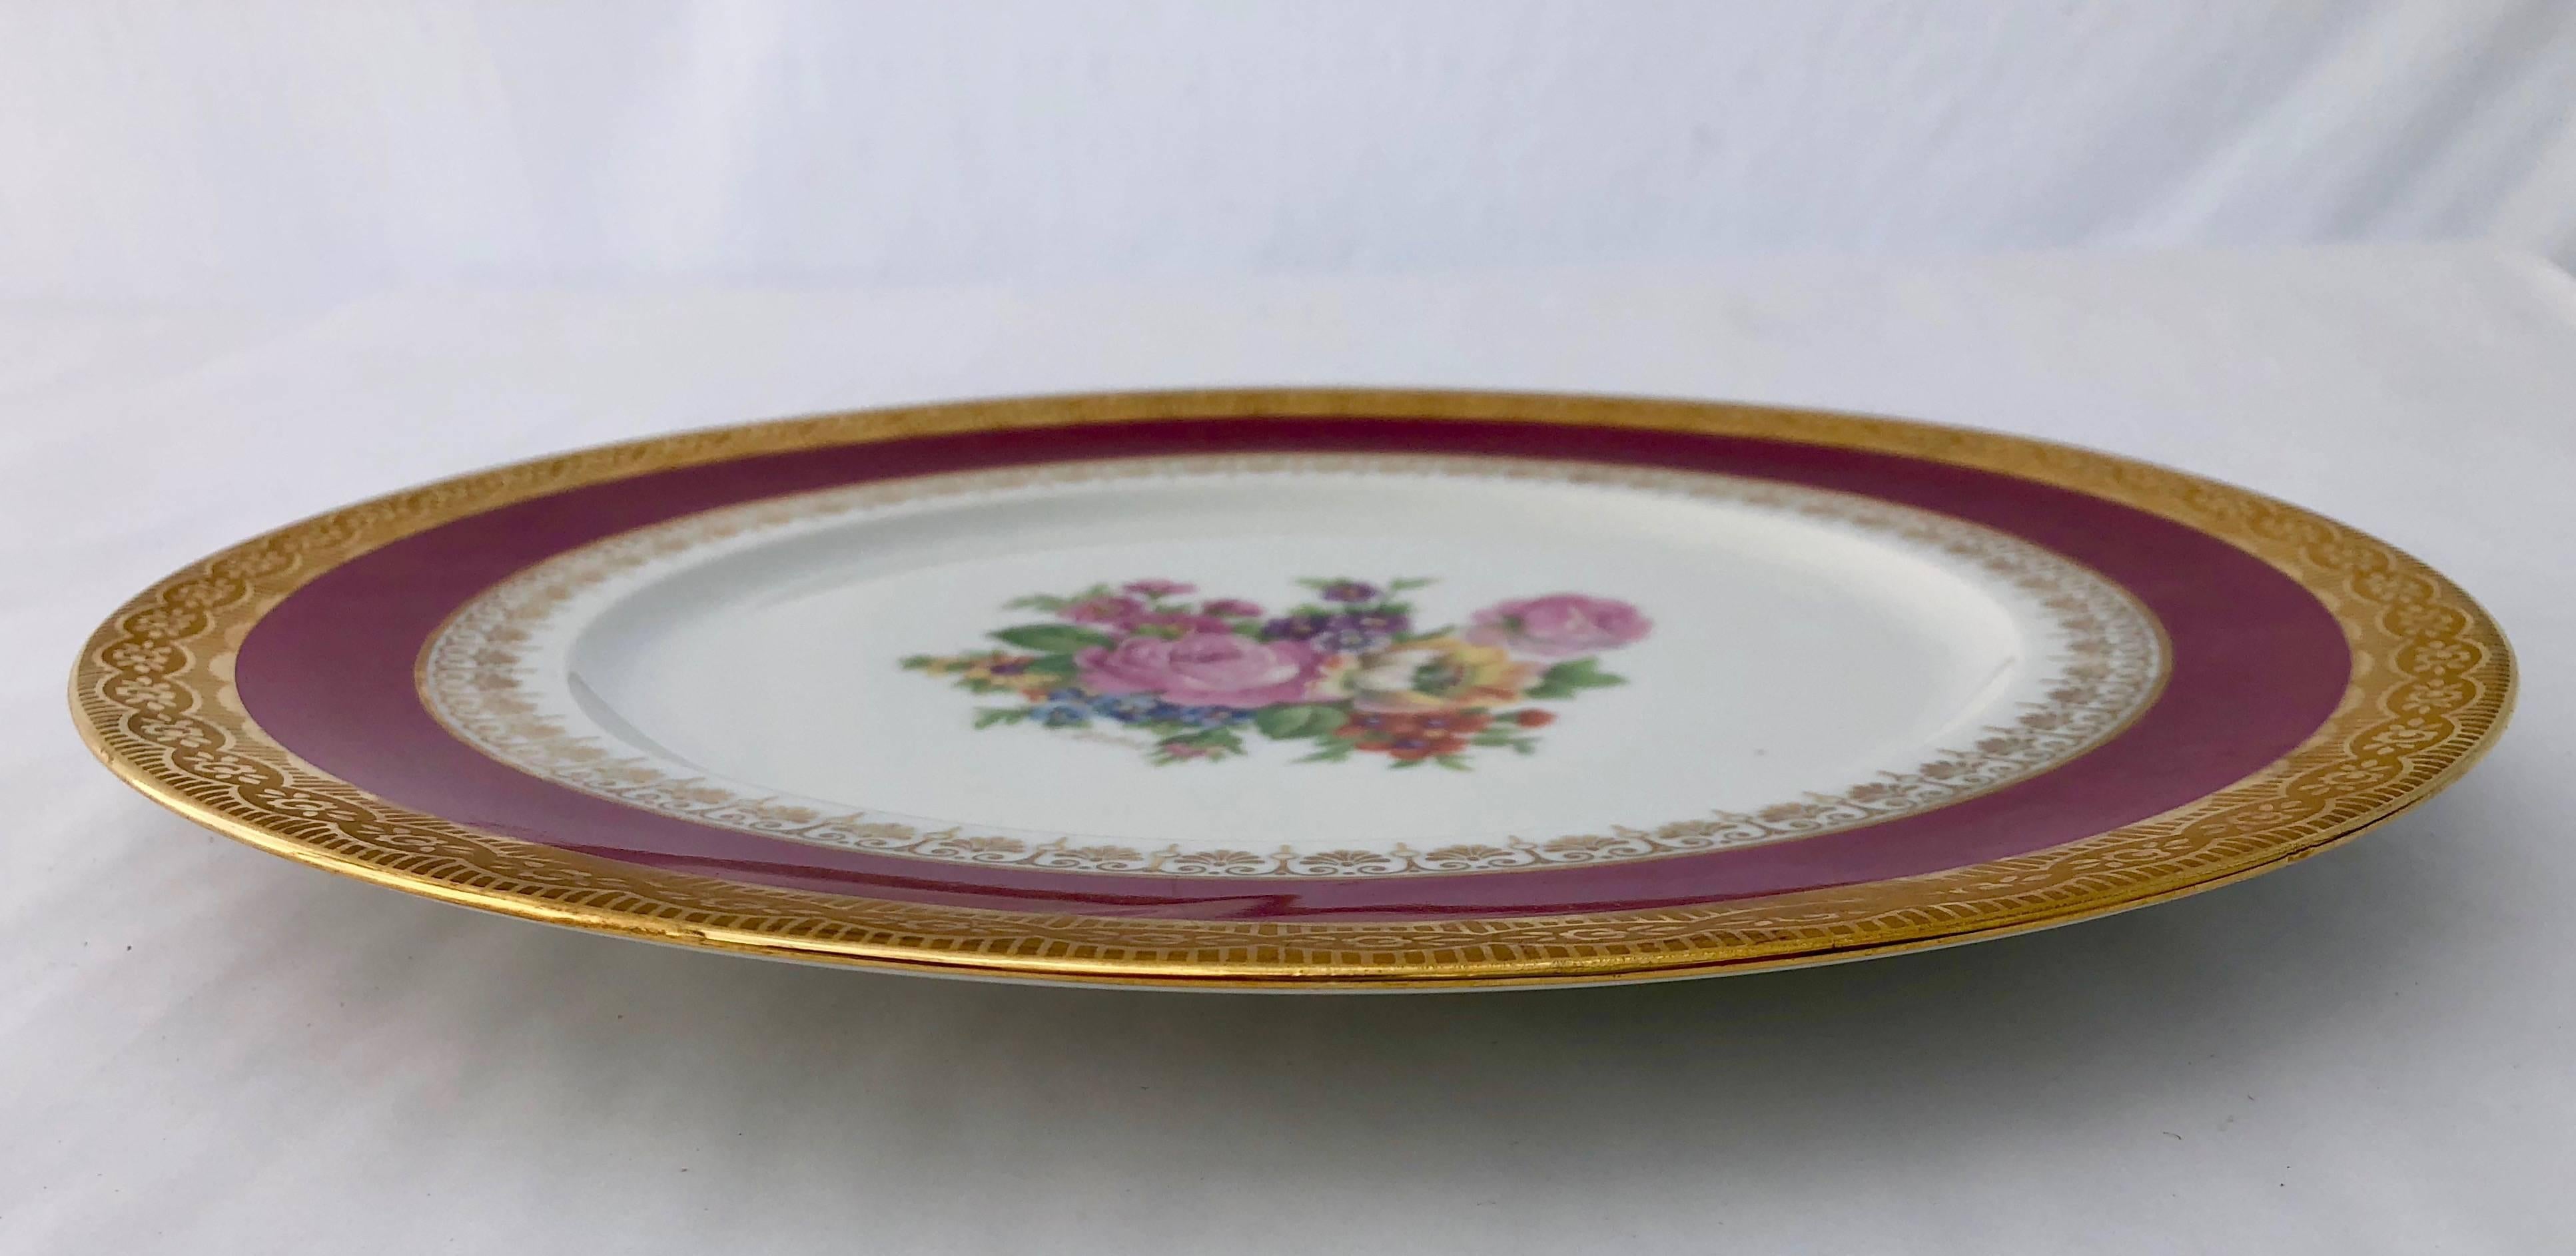 2 French Limoges Serving Plates, Hand-Painted Red, Gold with Decorative Flowers For Sale 5